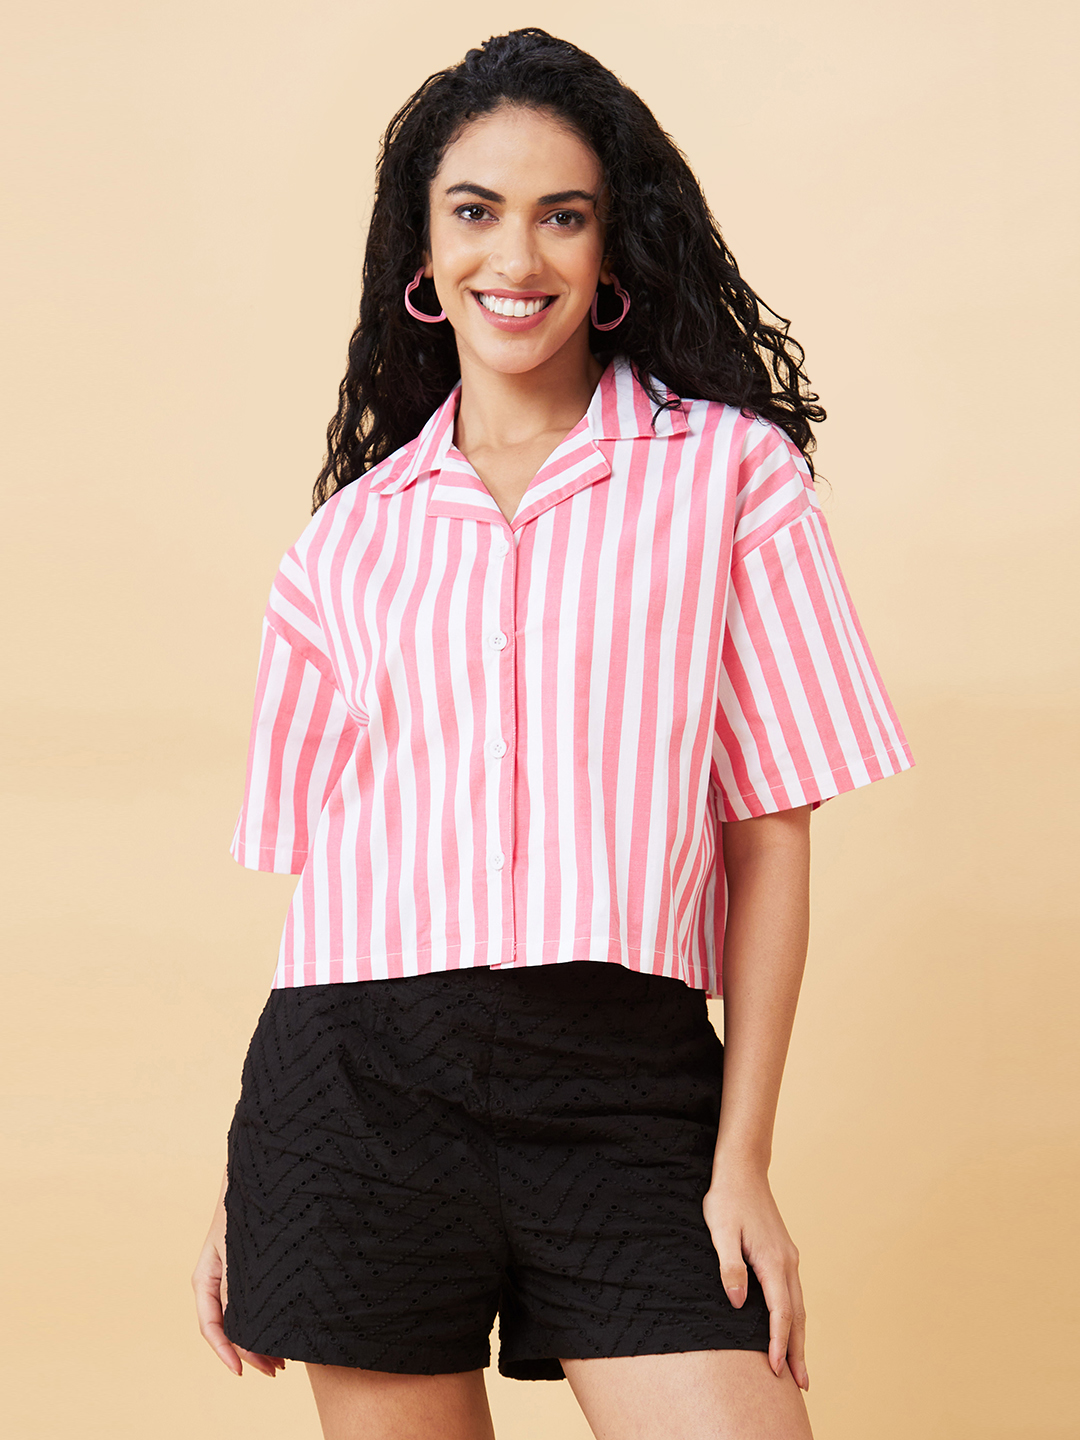 Globus Women Coral Striped Shirt Style Casual Top